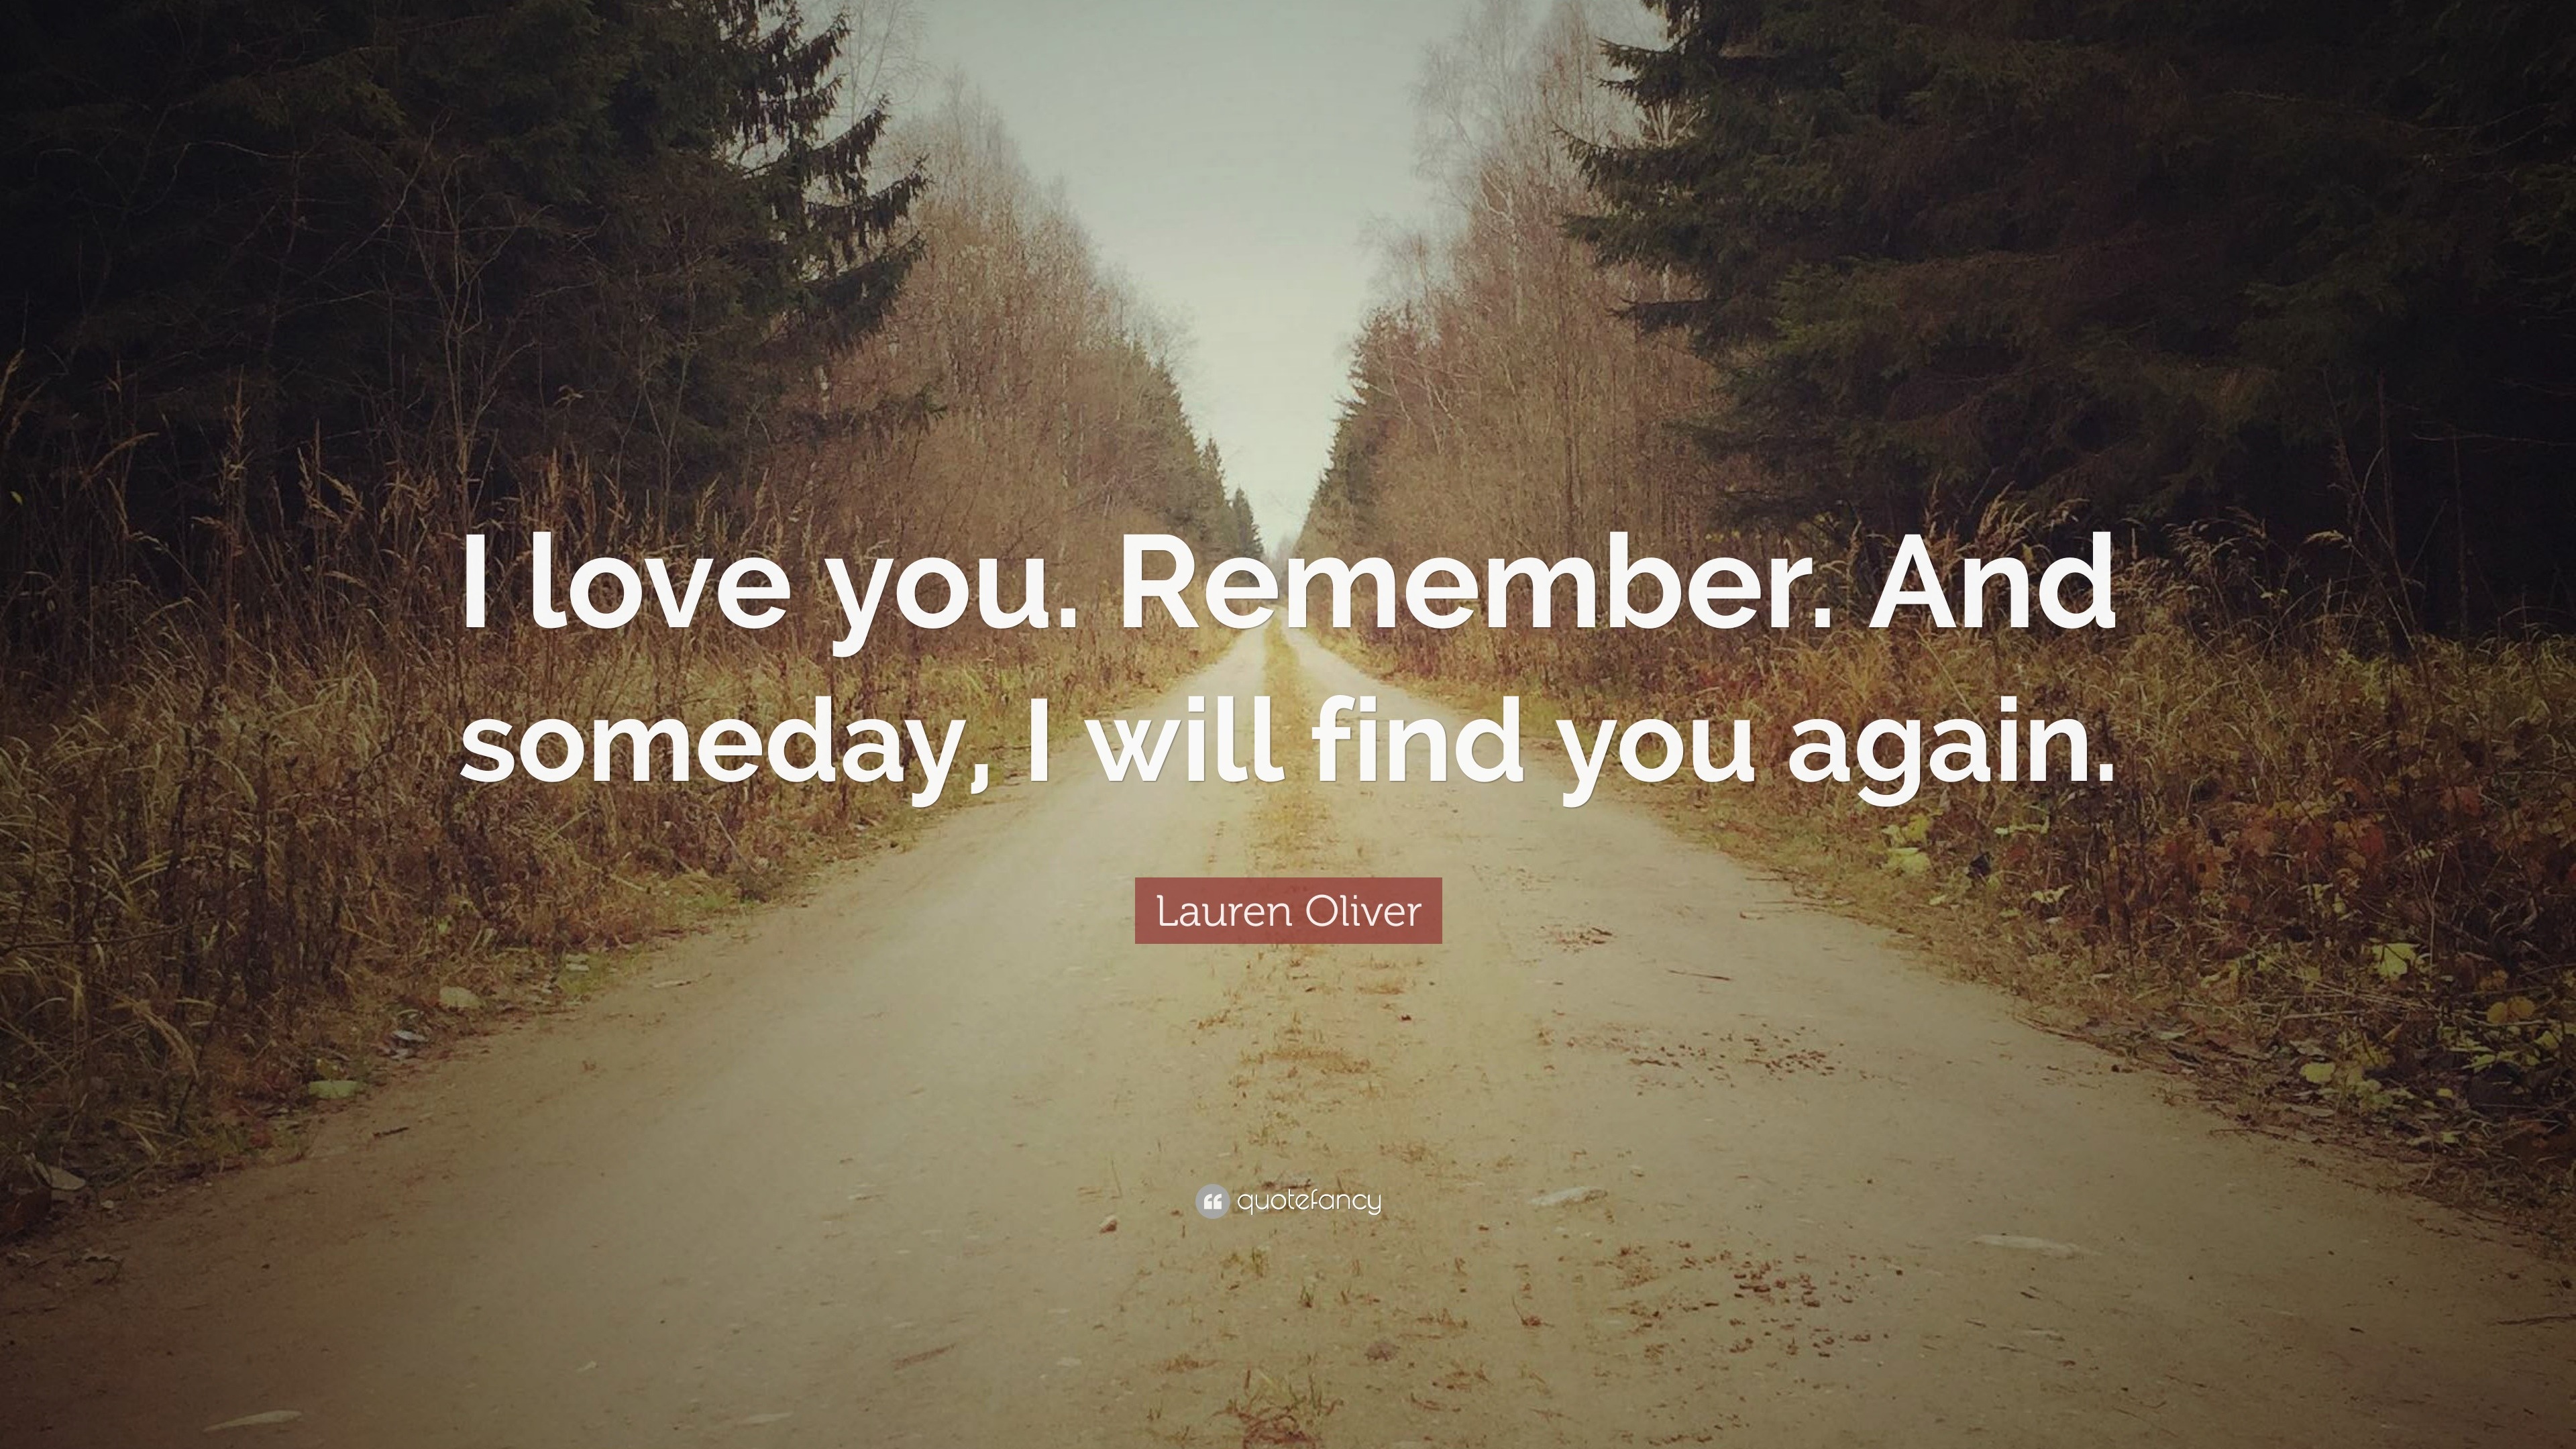 Lauren Oliver Quote “I love you Remember And someday I will